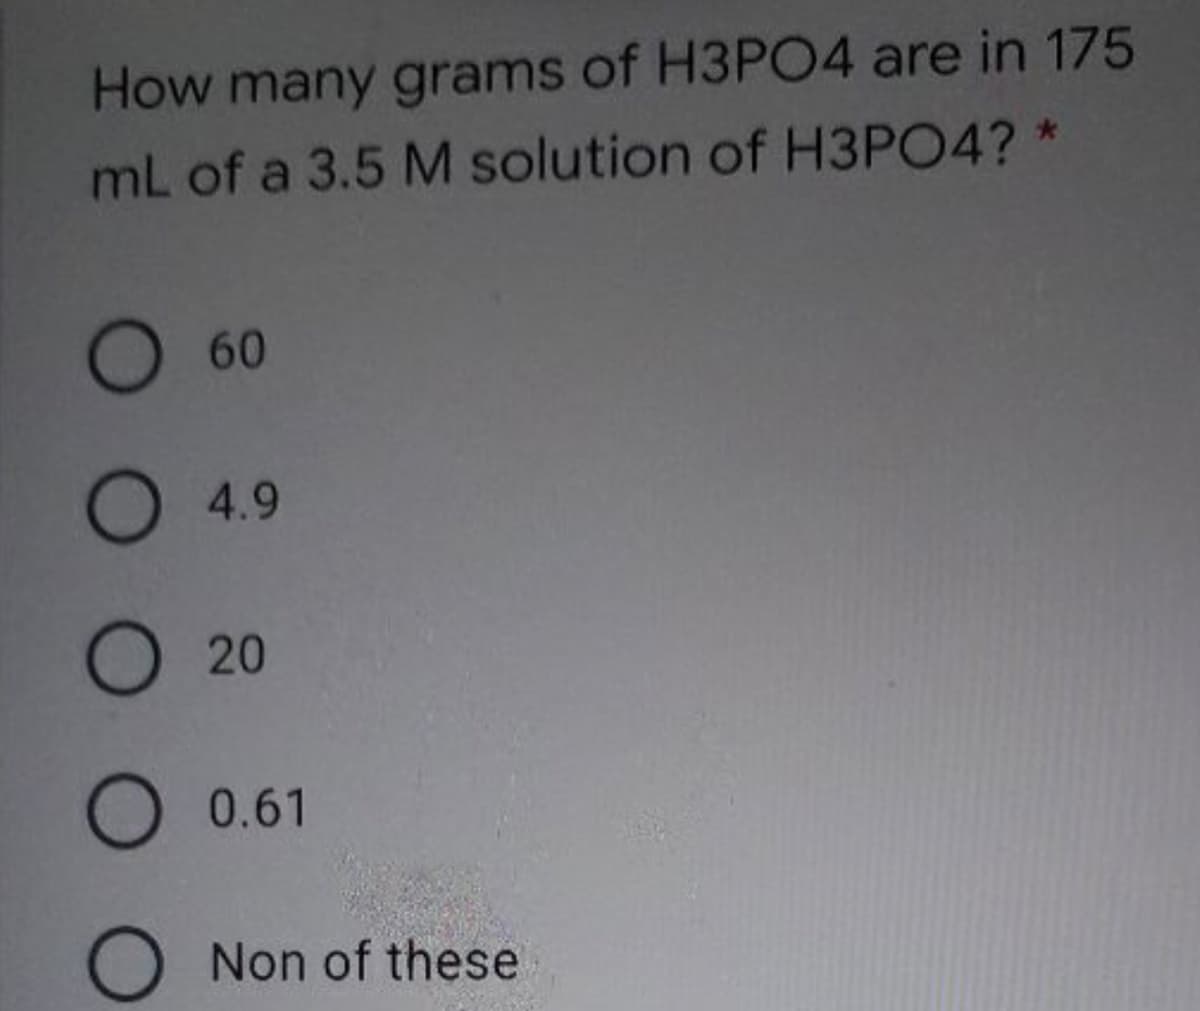 How many grams of H3PO4 are in 175
mL of a 3.5 M solution of H3PO4? *
O60
O 4.9
О 20
O 0.61
O Non of these
